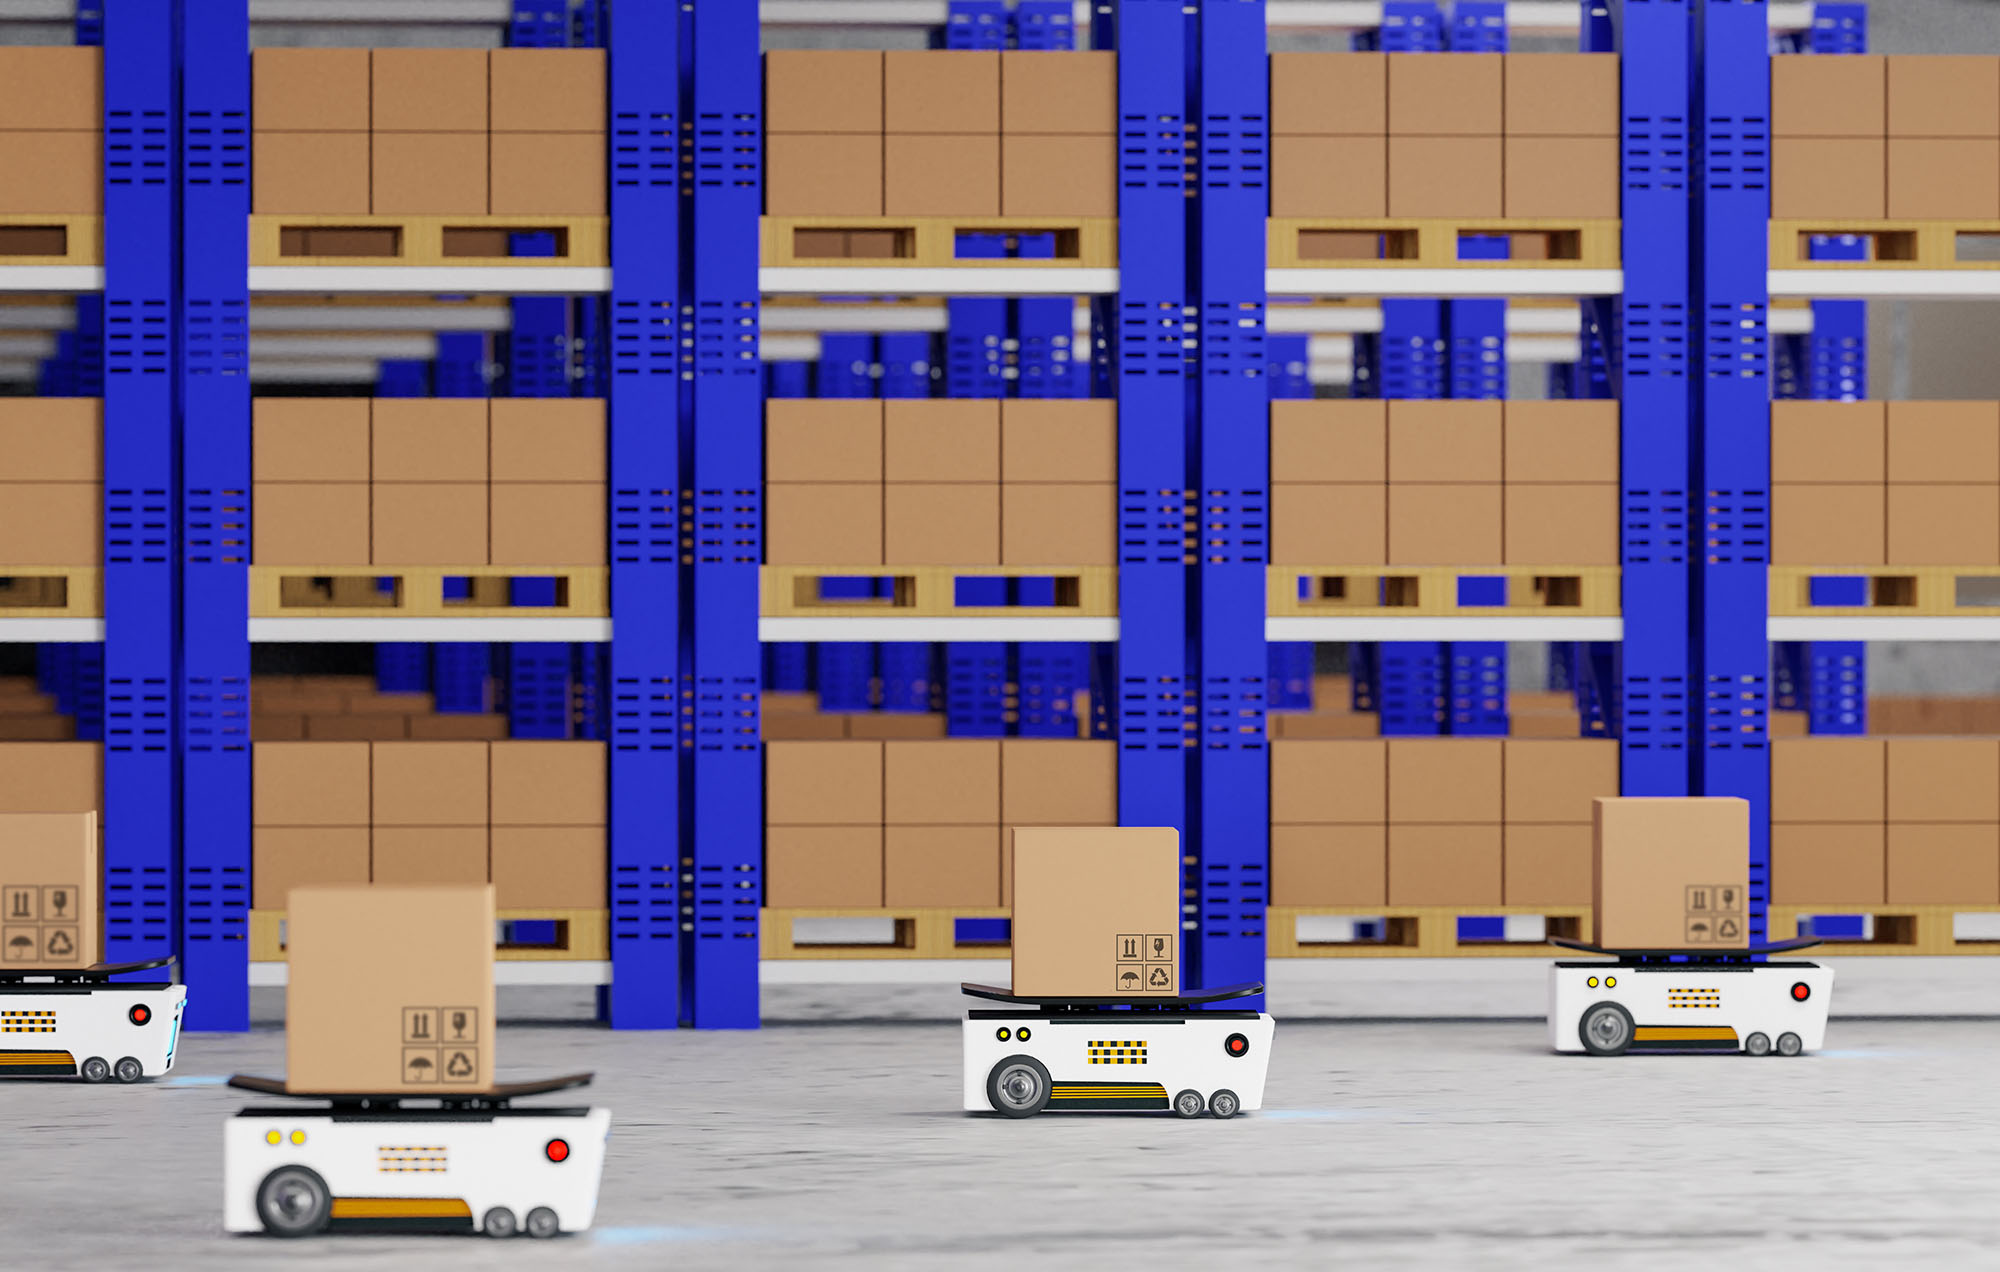 An illustration of autonomous robots working in a warehouse